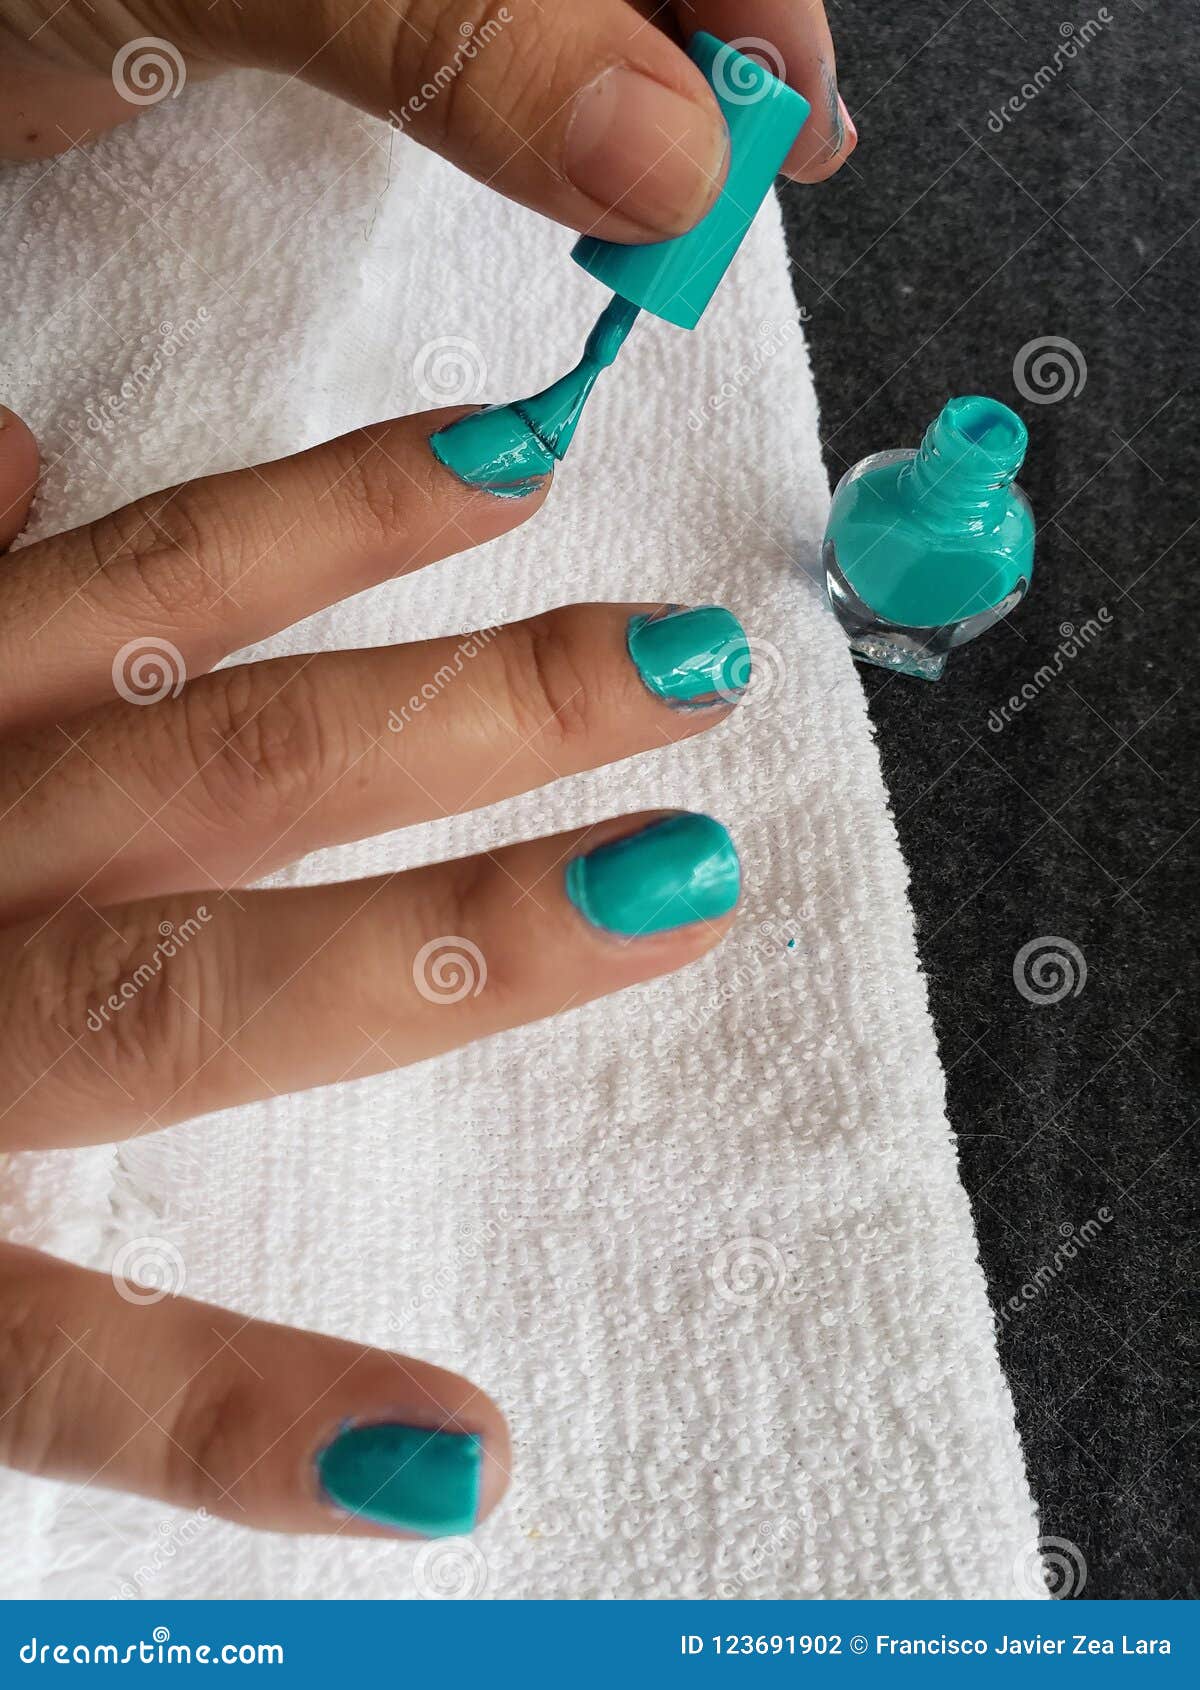 hand of woman painting her nails in aquamarine color